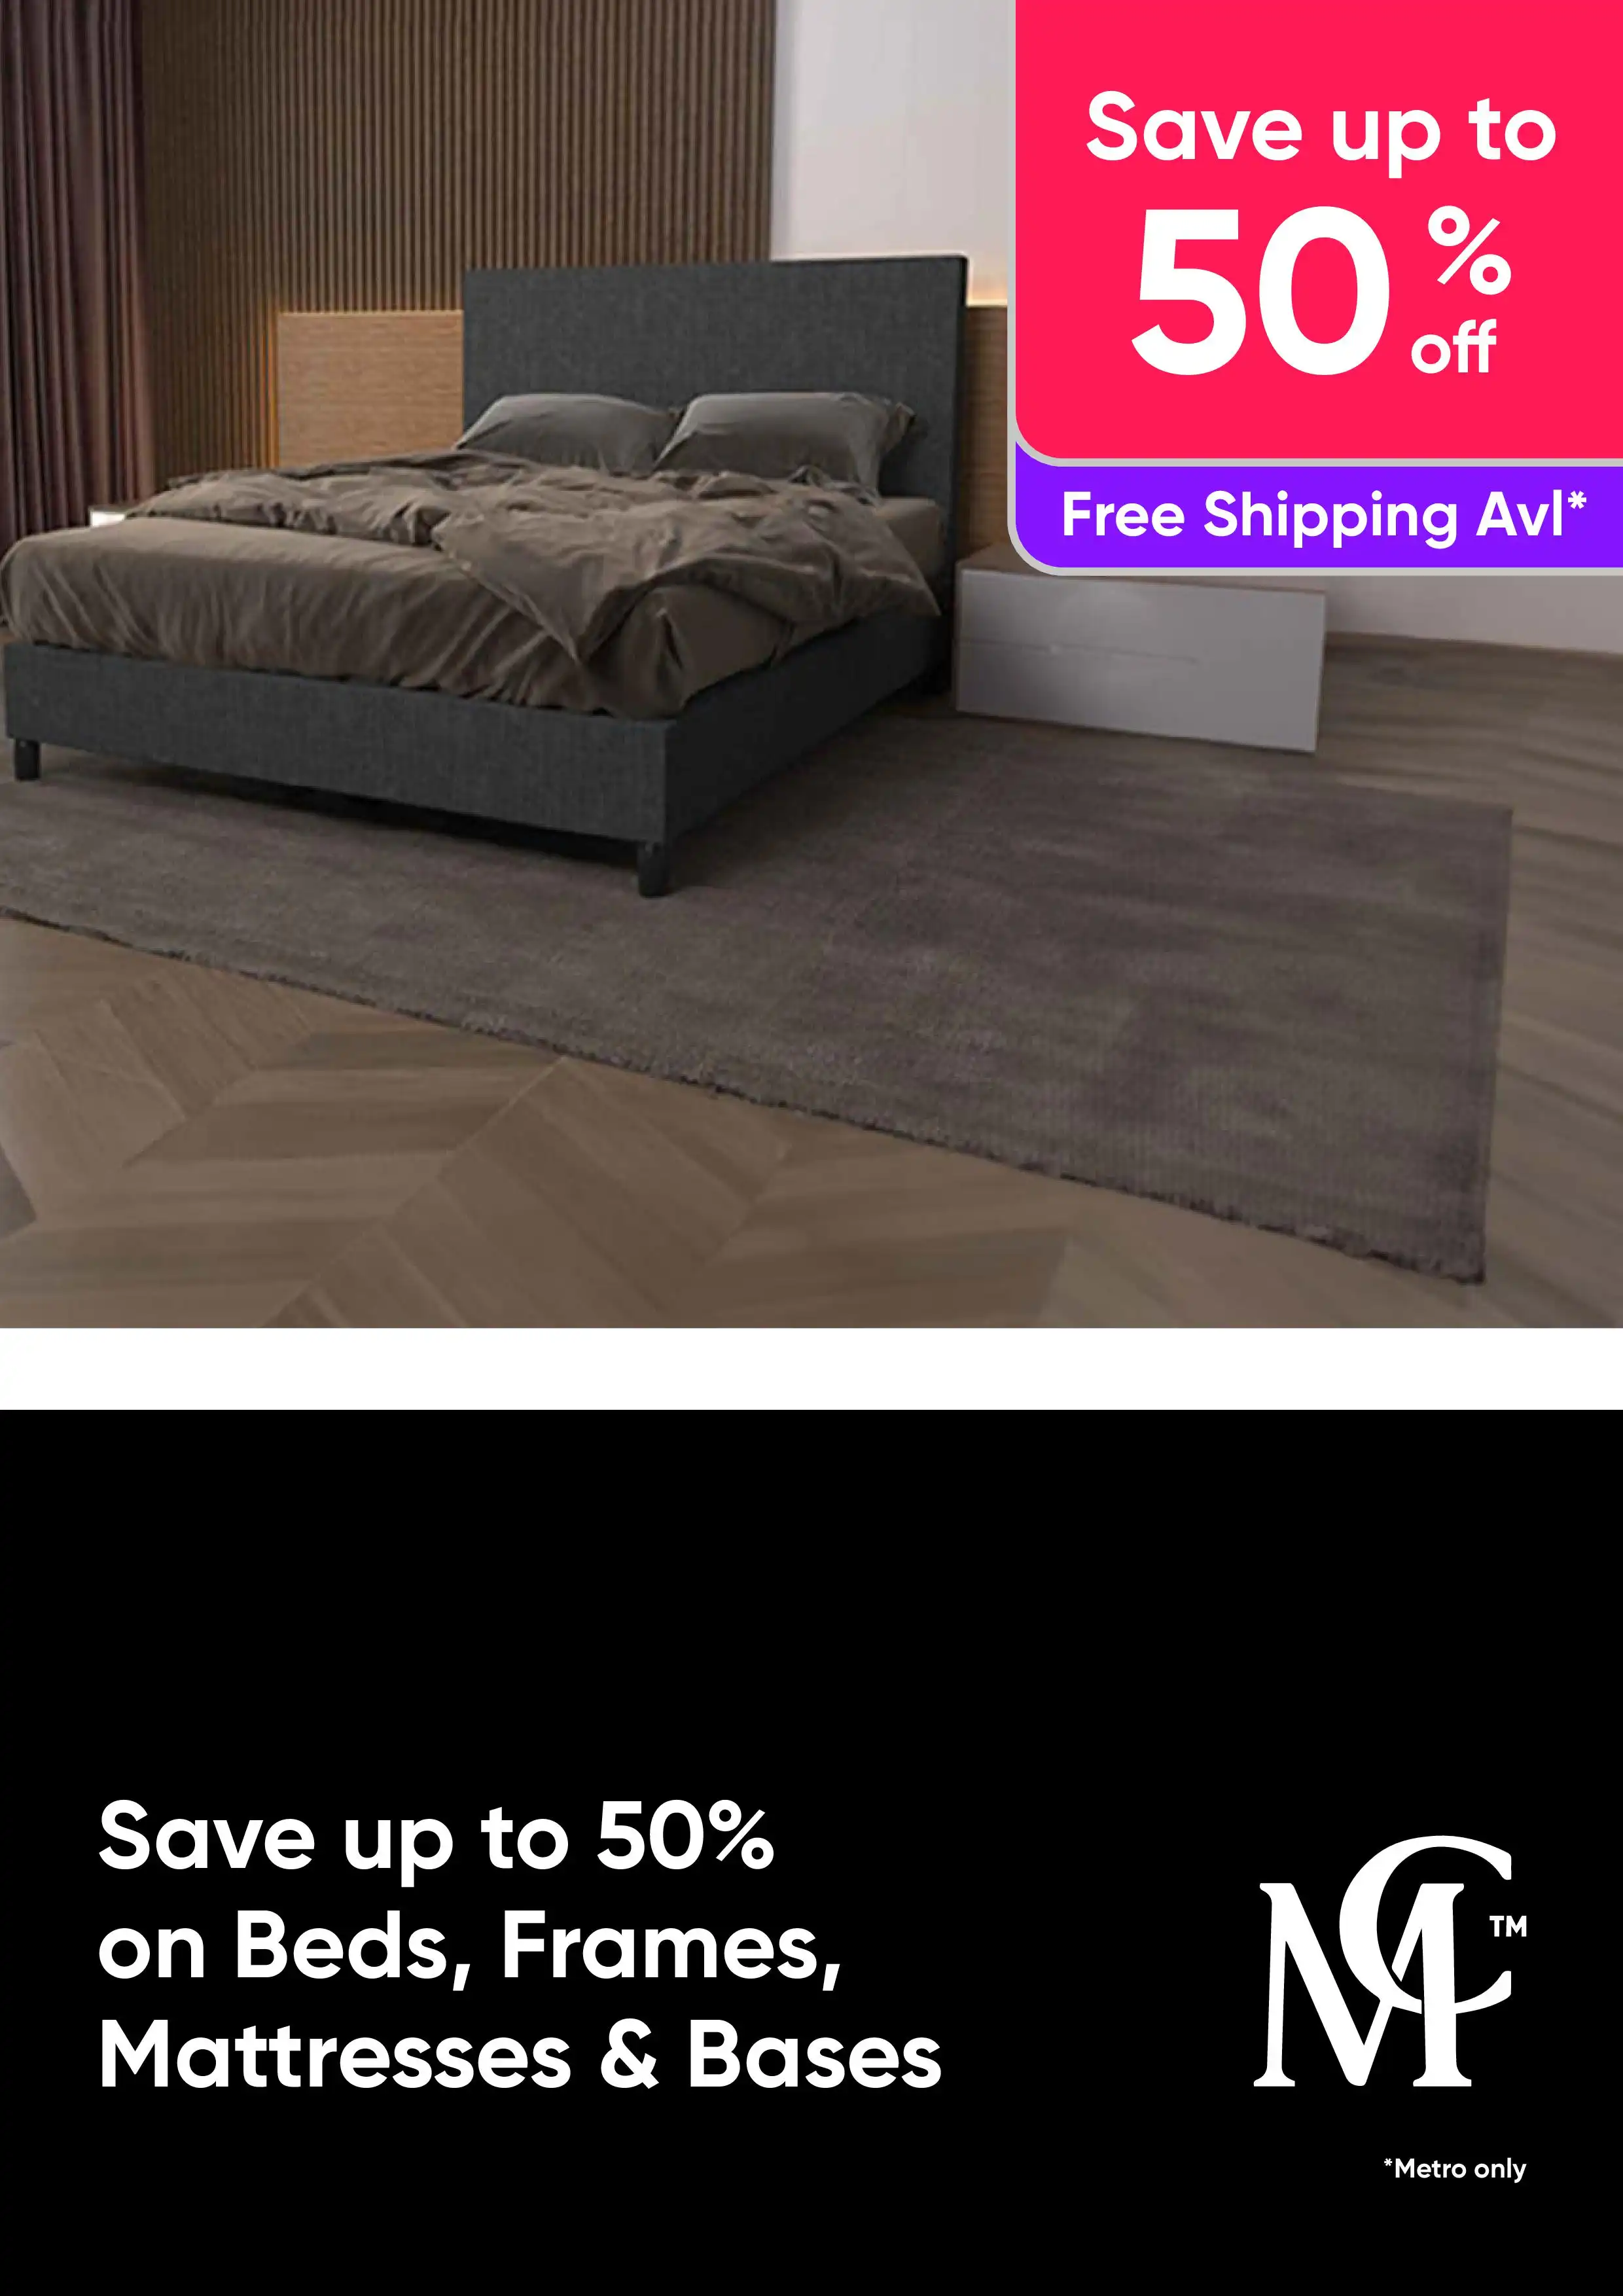 Save up to 50% on Beds, Frames, Mattresses & Bases